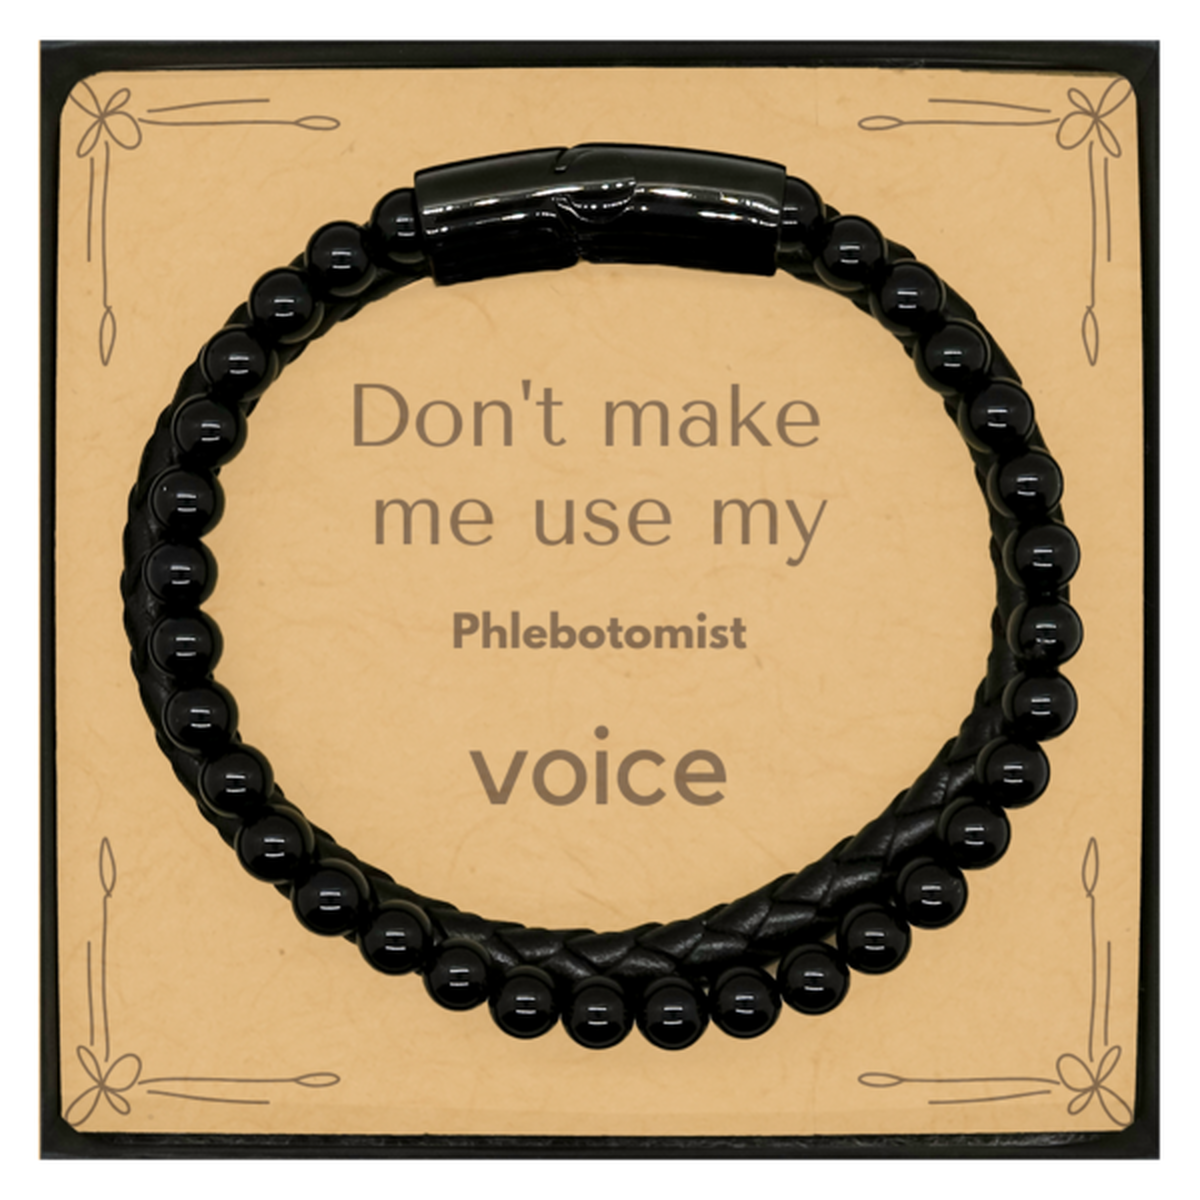 Don't make me use my Phlebotomist voice, Sarcasm Phlebotomist Card Gifts, Christmas Phlebotomist Stone Leather Bracelets Birthday Unique Gifts For Phlebotomist Coworkers, Men, Women, Colleague, Friends